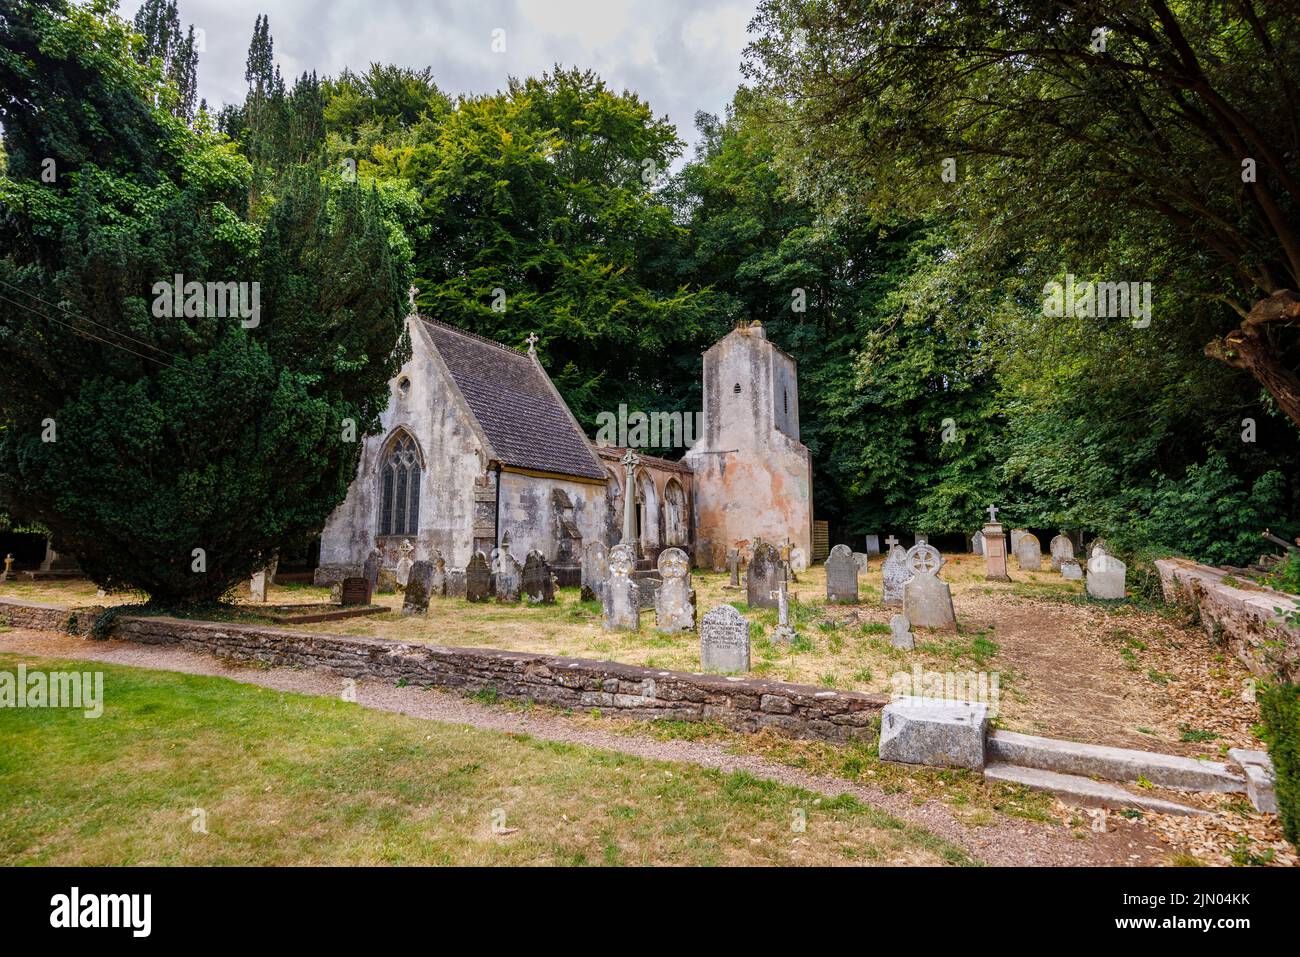 Old ruins within St Mary's Church in Bicton Park Botanic Gardens near East Budleigh in East Devon, south-west England Stock Photo